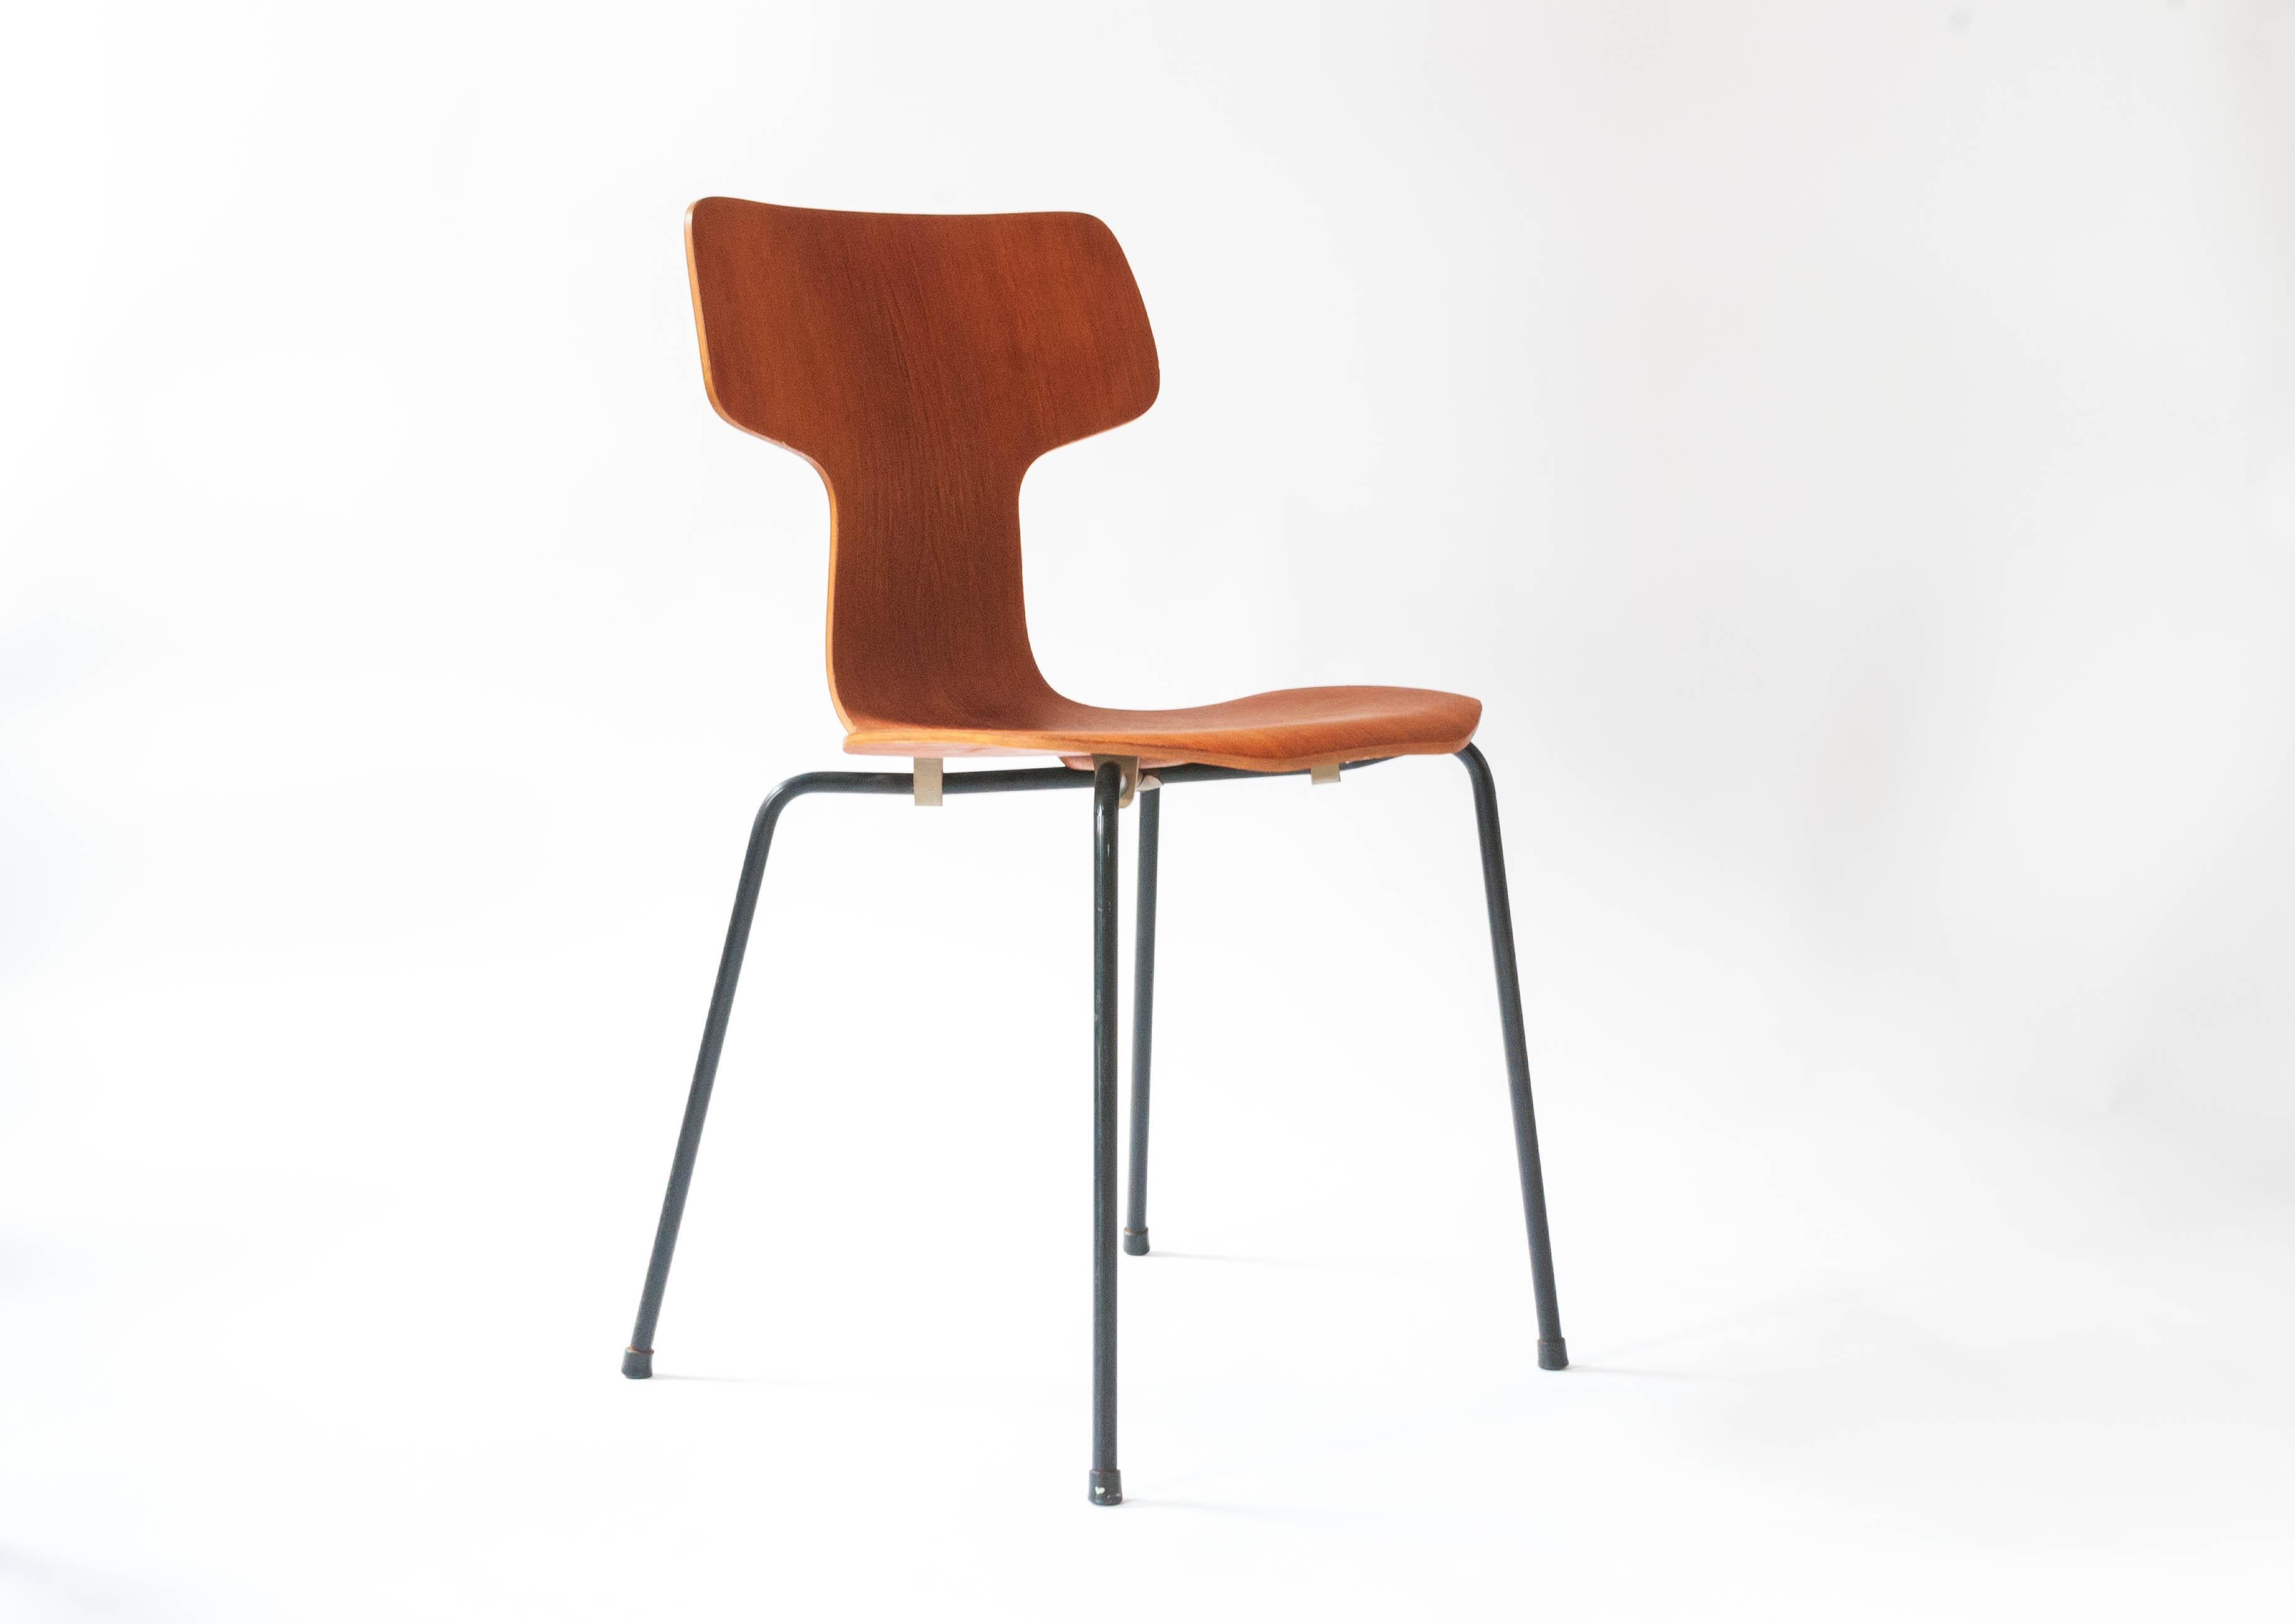 Early 1950 production model 3103 chair by Arne Jacobsen for Fritz Hansen. Features seats made out of teak and black lacquered wrapped foiled legs. Would make a great side chair or desk chair. The back rest does not support a lot of weight due to